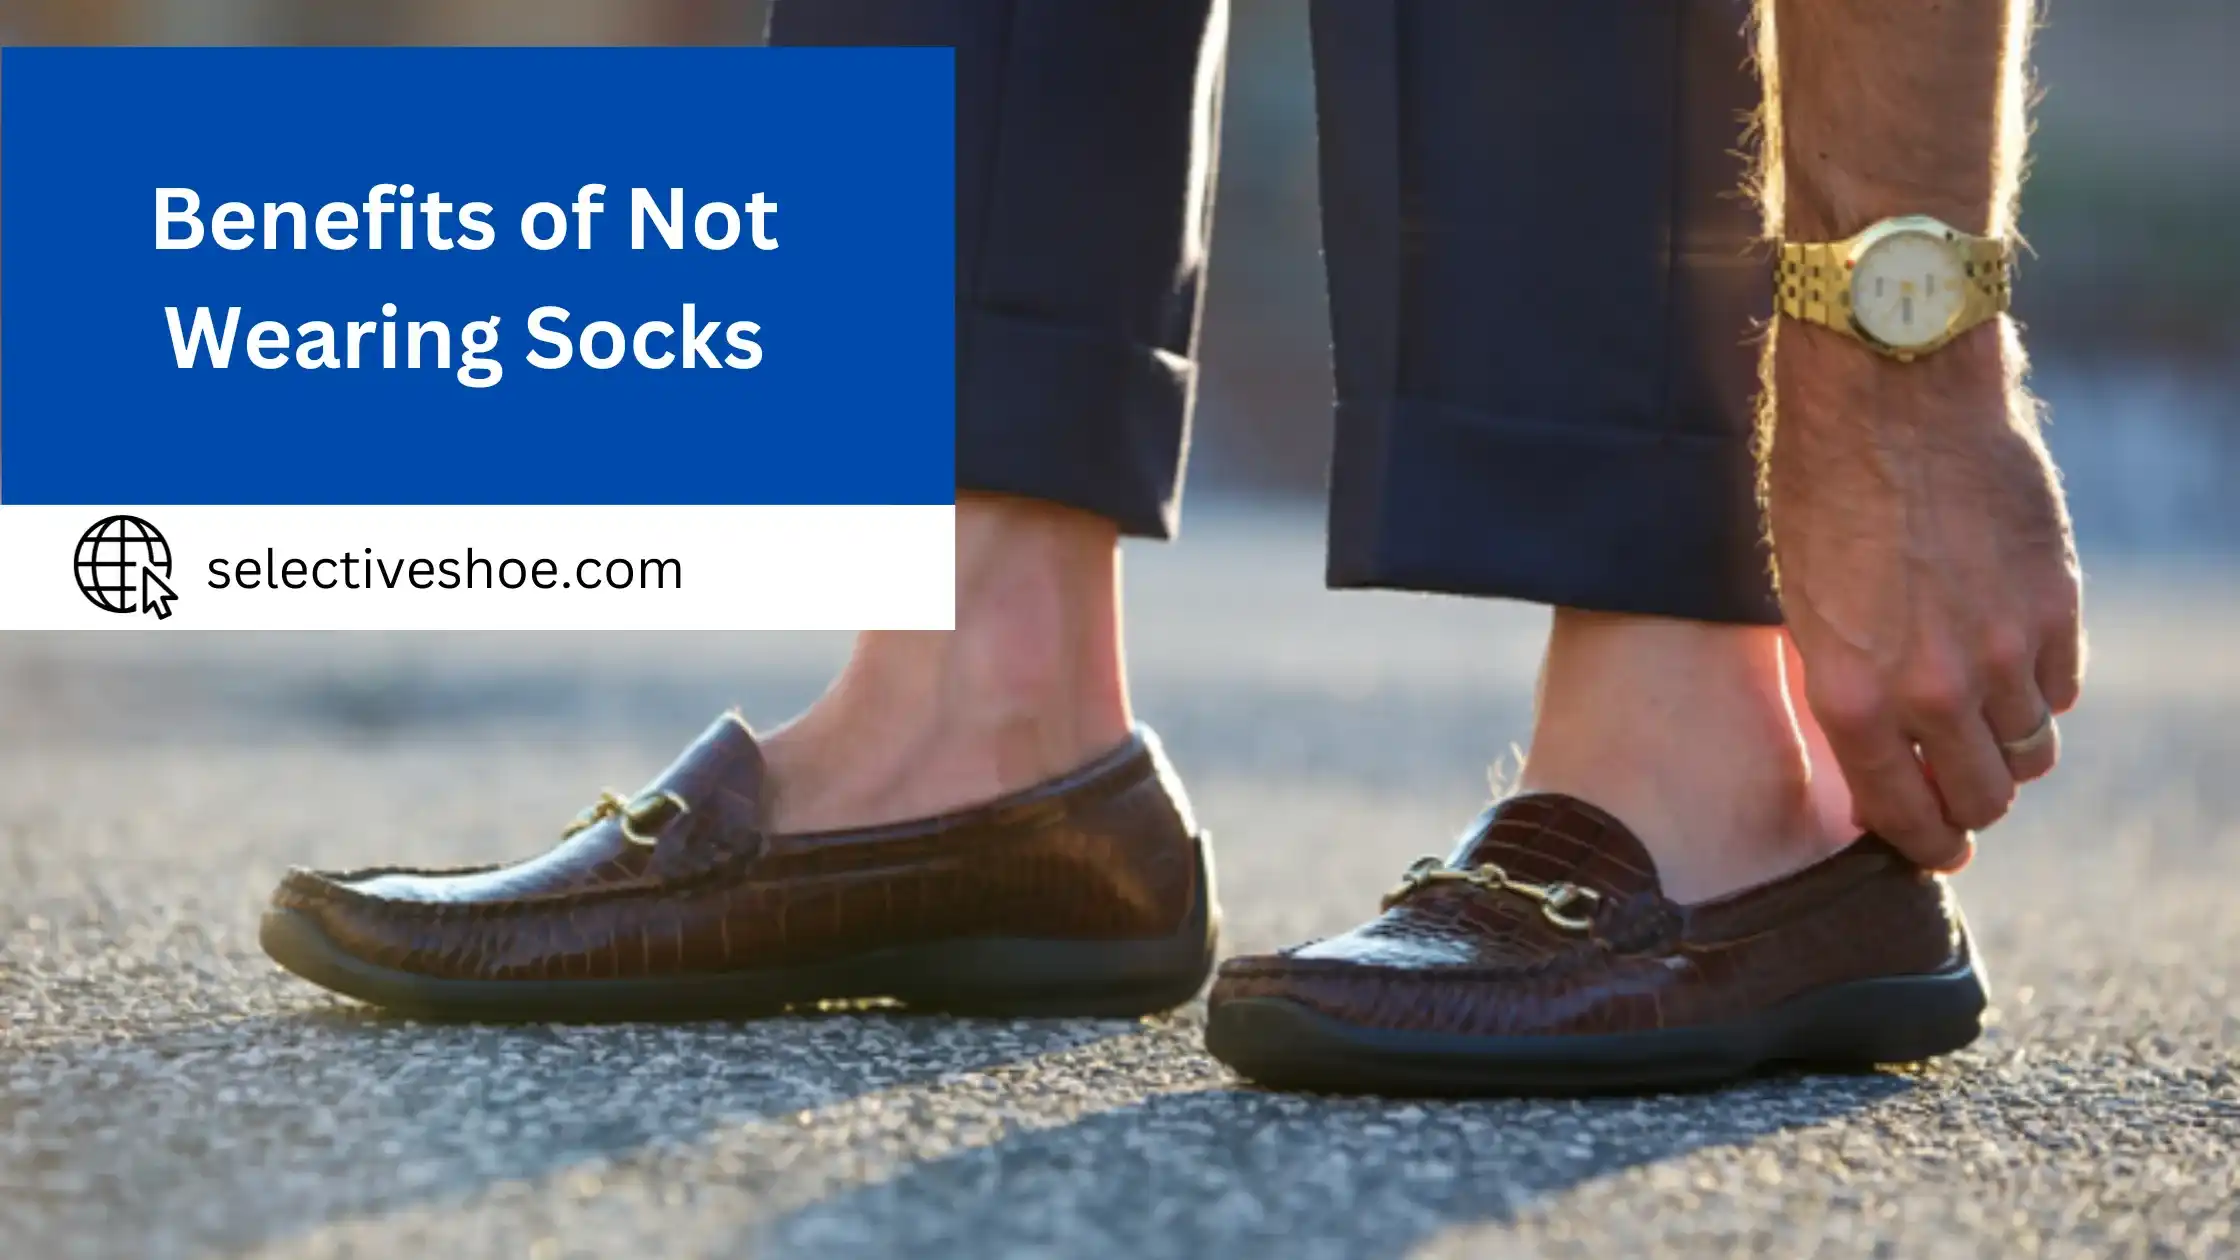 Benefits of Not Wearing Socks - A Comprehensive Guide